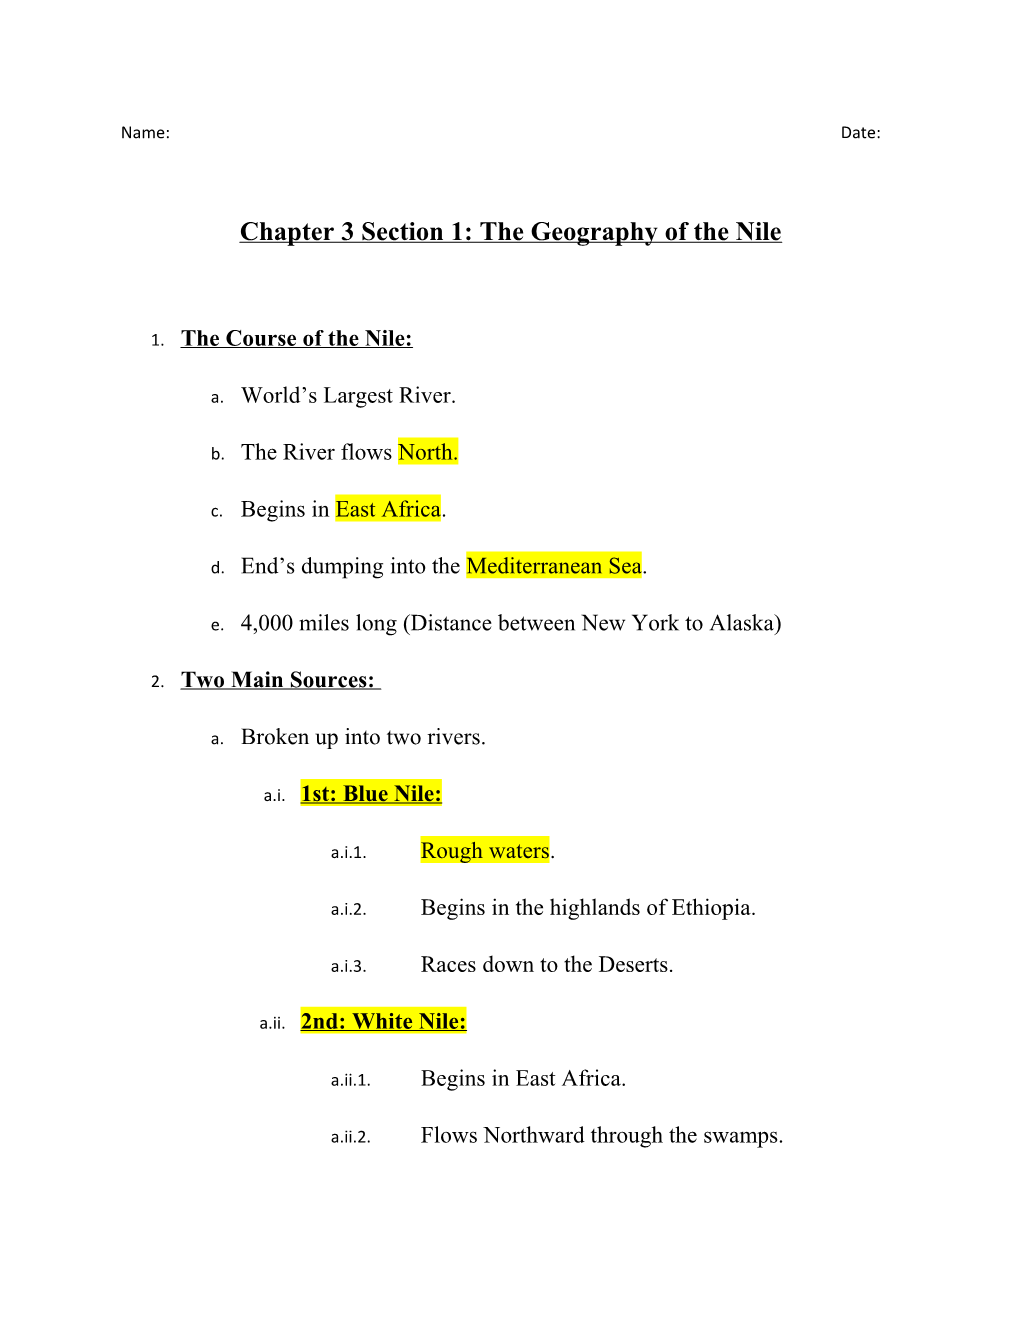 Chapter 3 Section 1: the Geography of the Nile